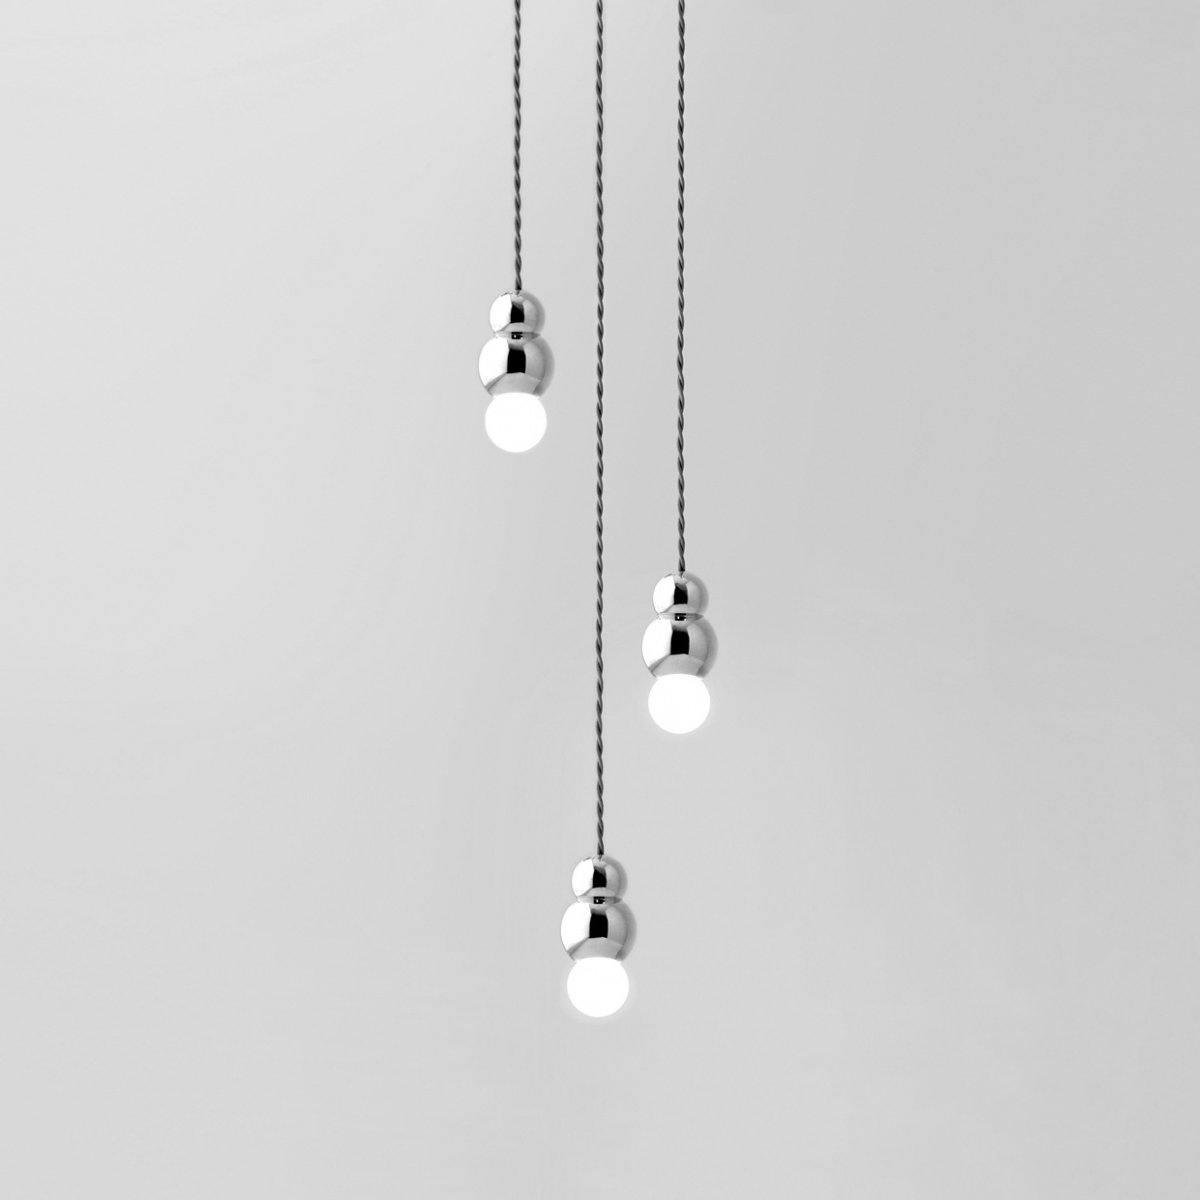 Chrome Flex Ball Light Pendant Series, featuring 3 heads with a diameter of 3.9 inches and a height of 6.81 inches (or 10cm x 17.3cm).